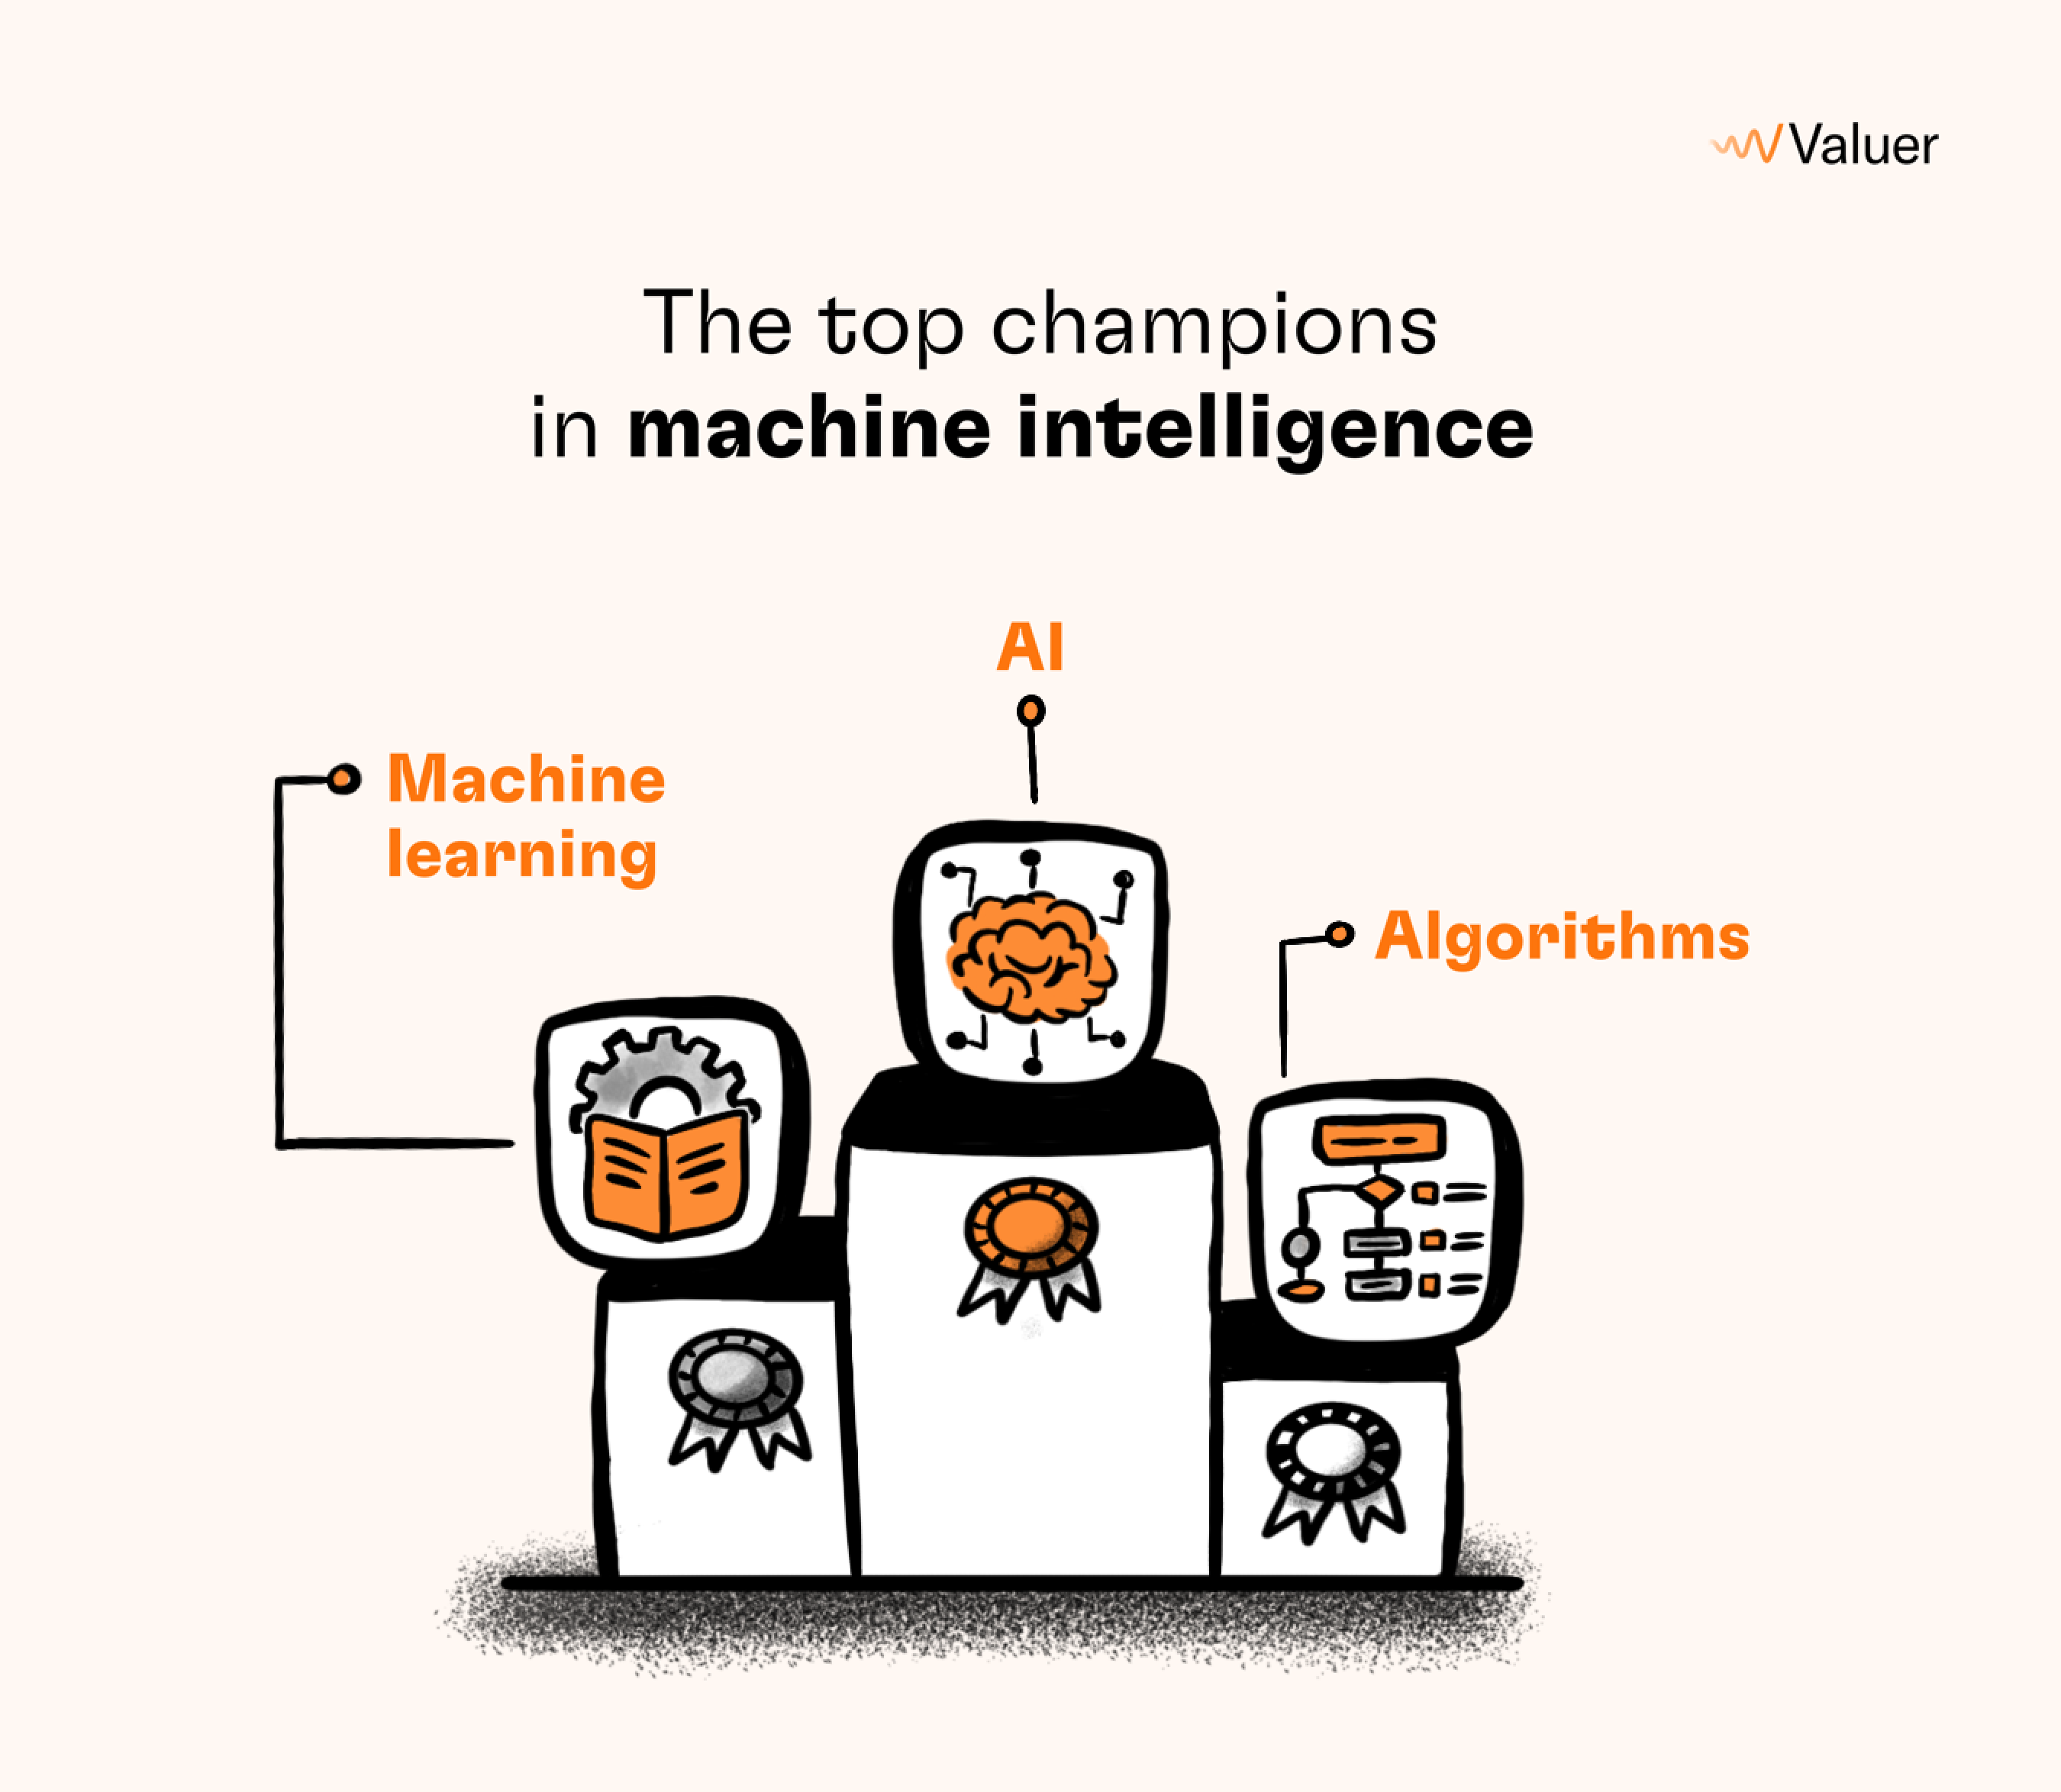 The Top Champions in machine intelligence